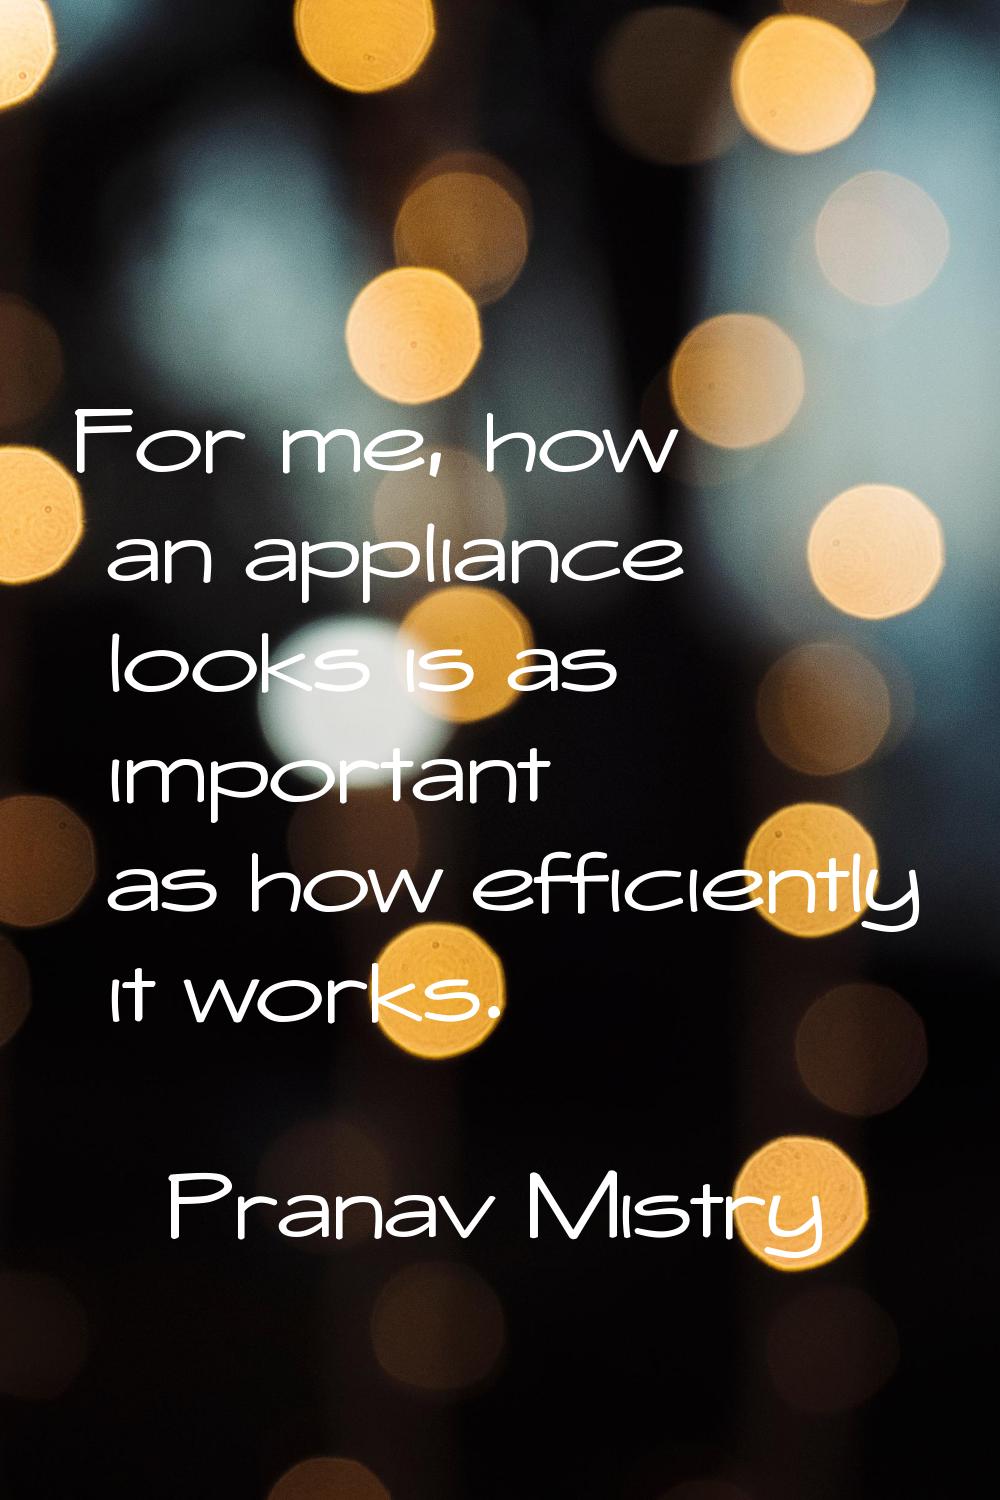 For me, how an appliance looks is as important as how efficiently it works.